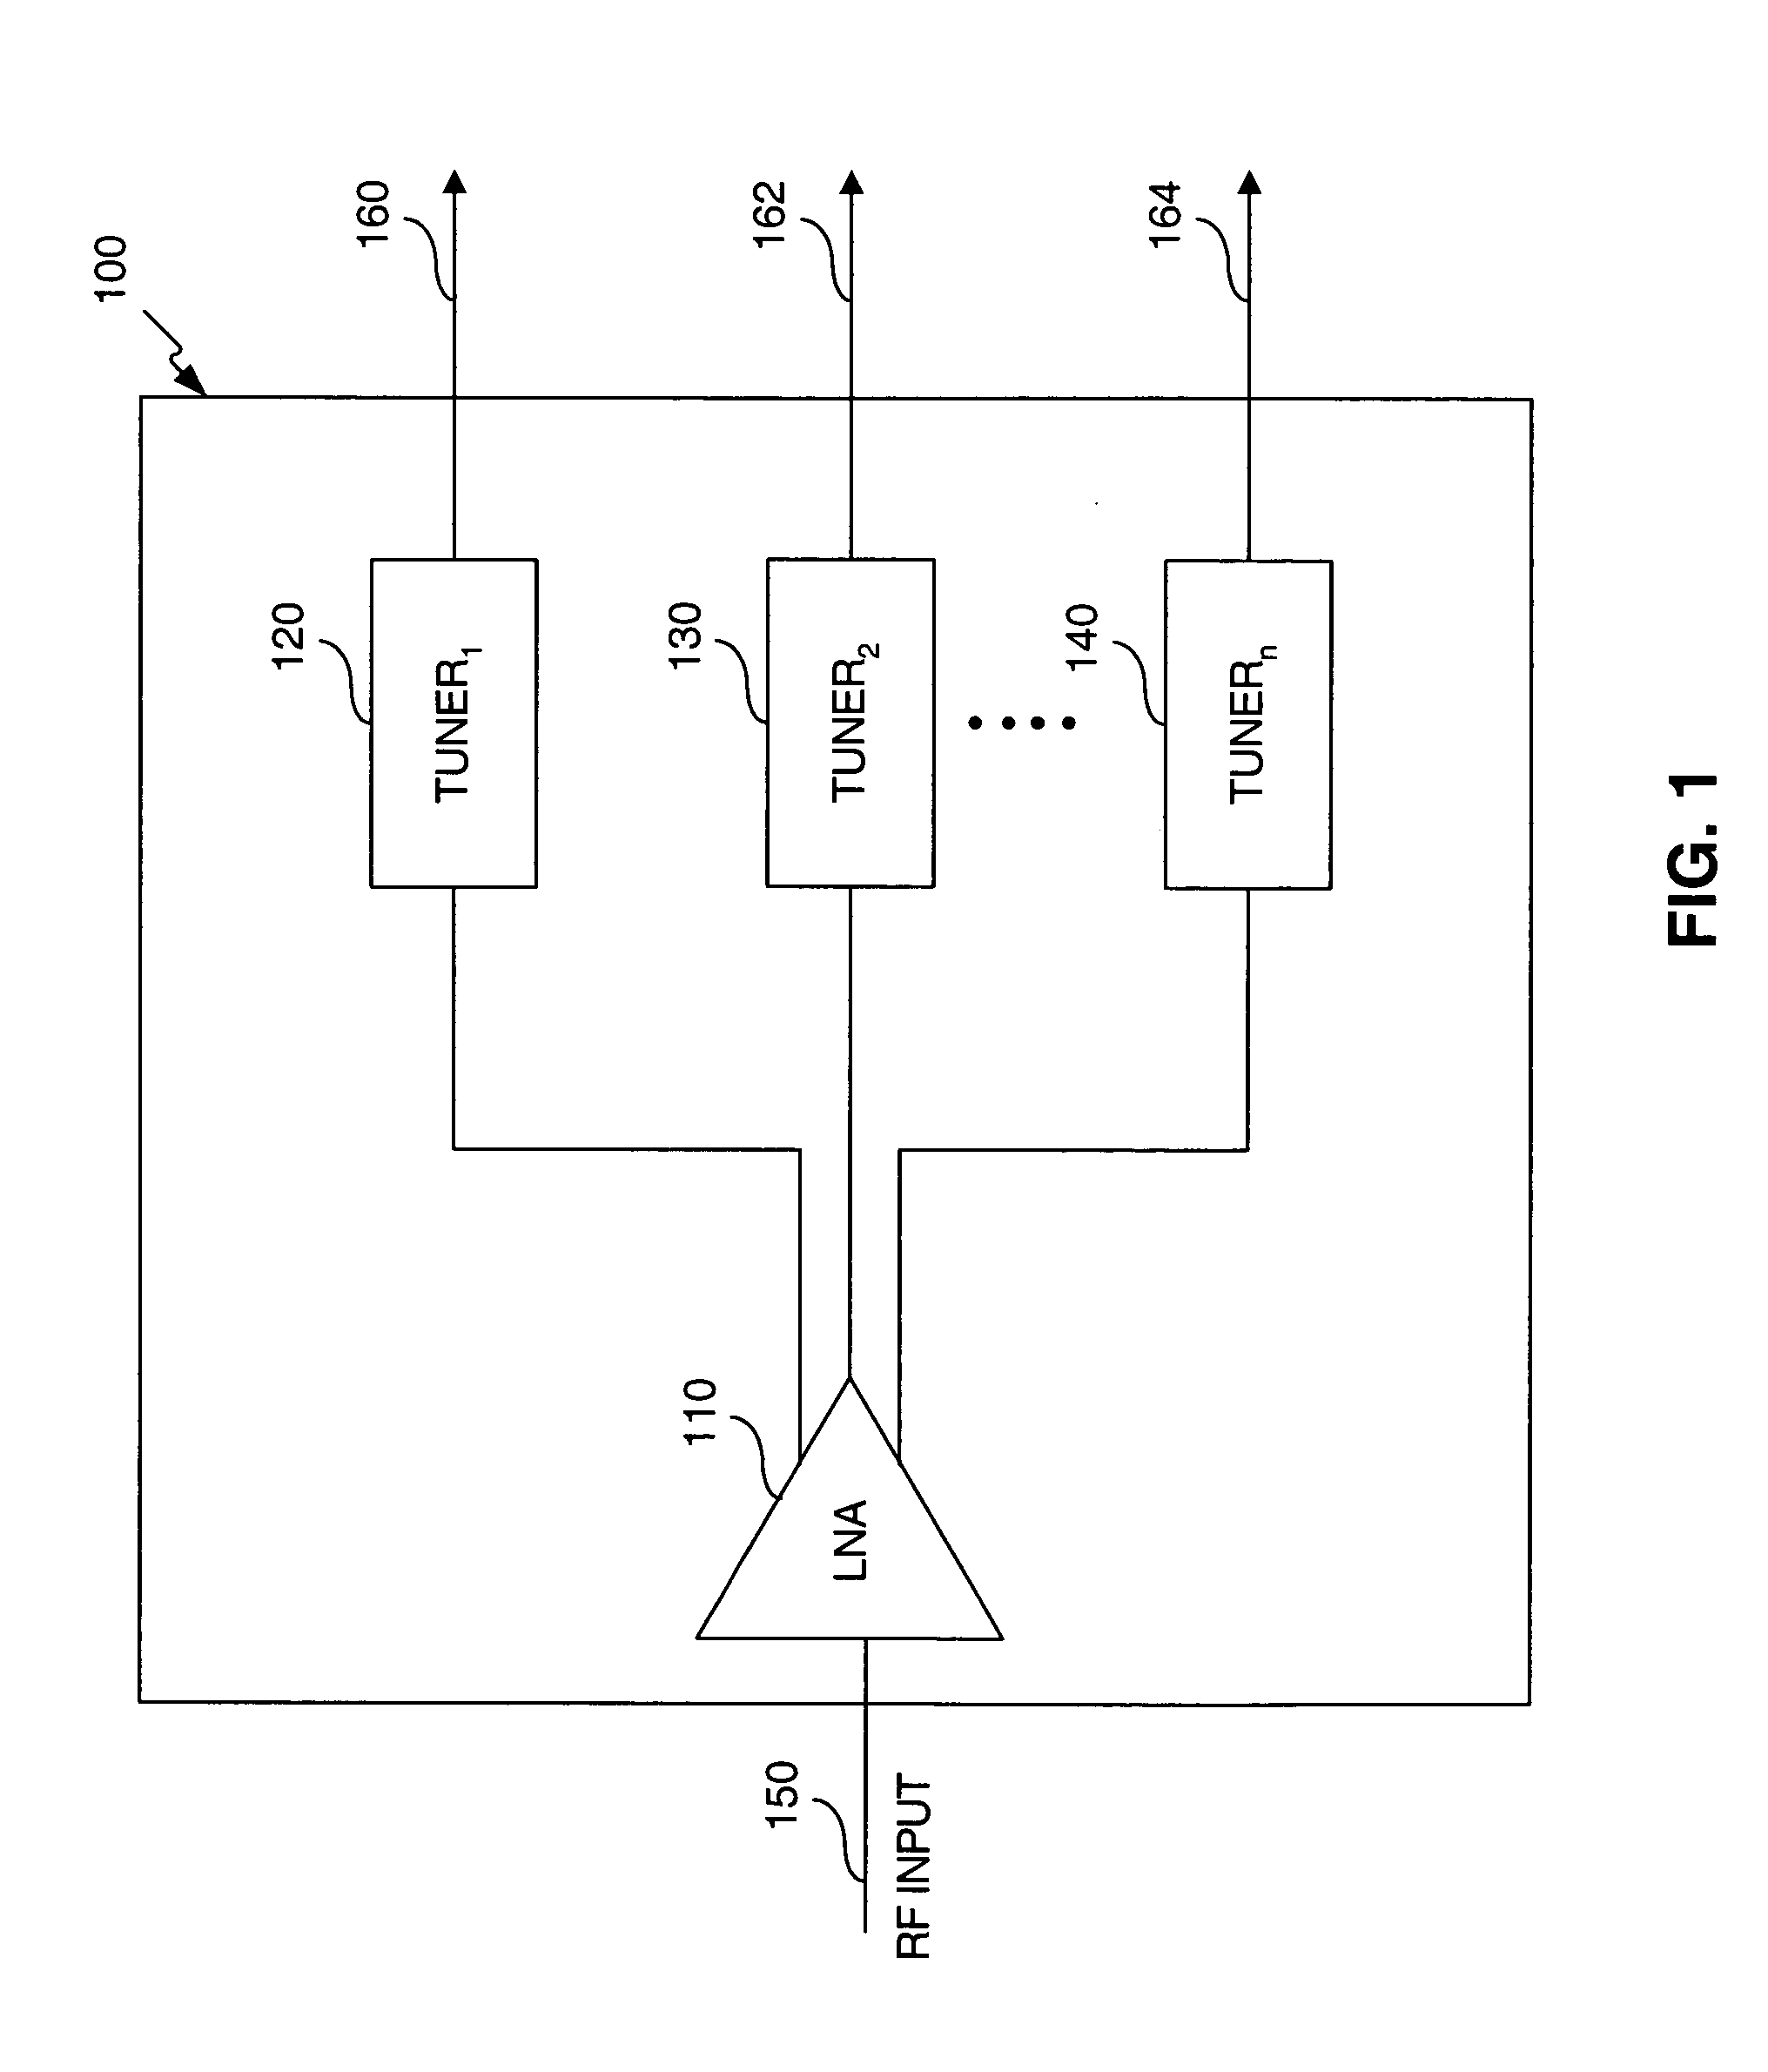 Multi-tuner receivers with cross talk reduction